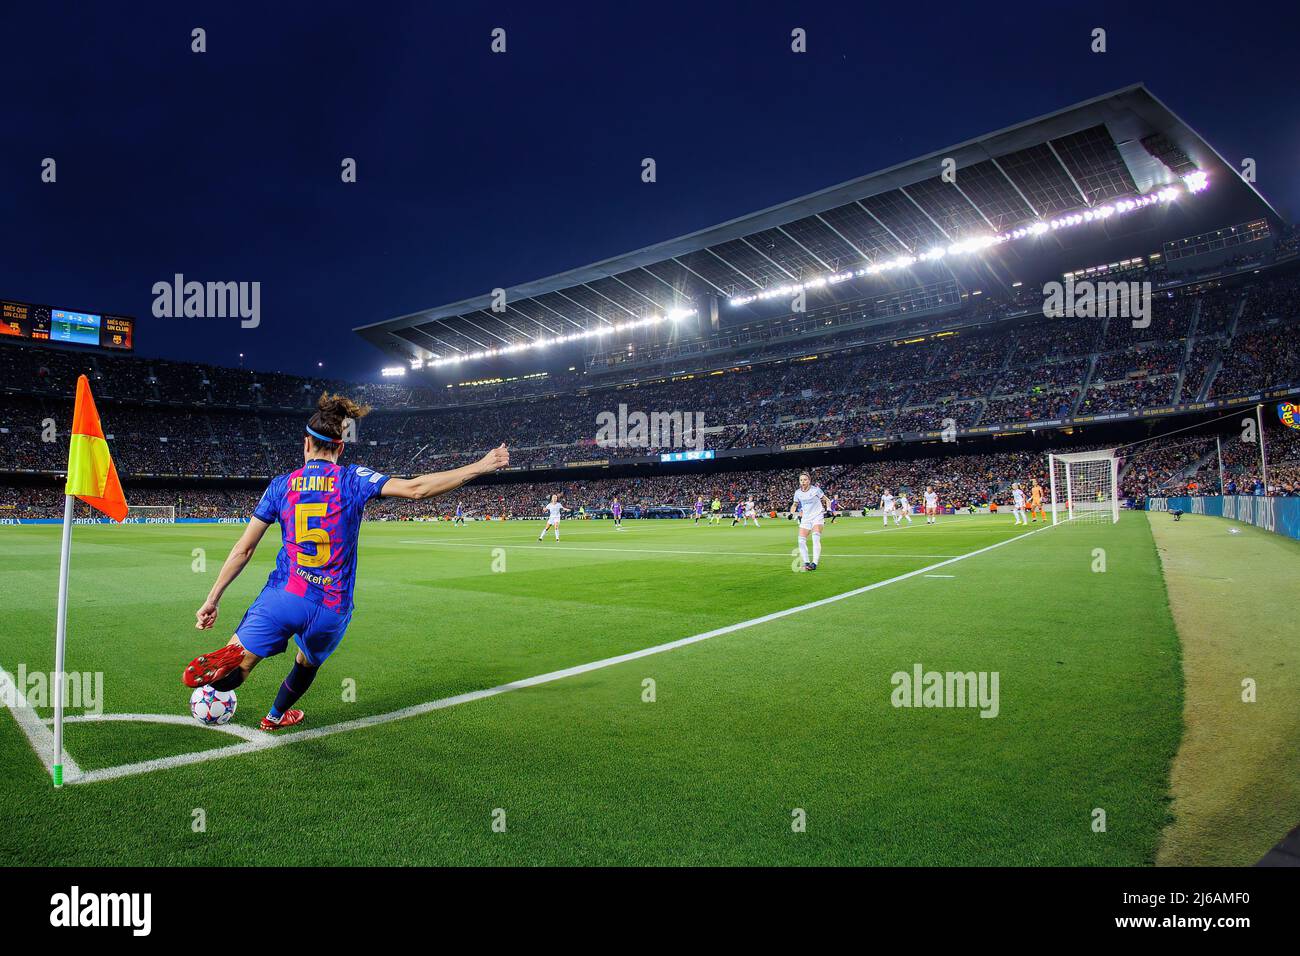 BARCELONA - MAR 30: Melanie Serrano in action during the UEFA Women's Champions League match between FC Barcelona and Real Madrid at the Camp Nou Stad Stock Photo